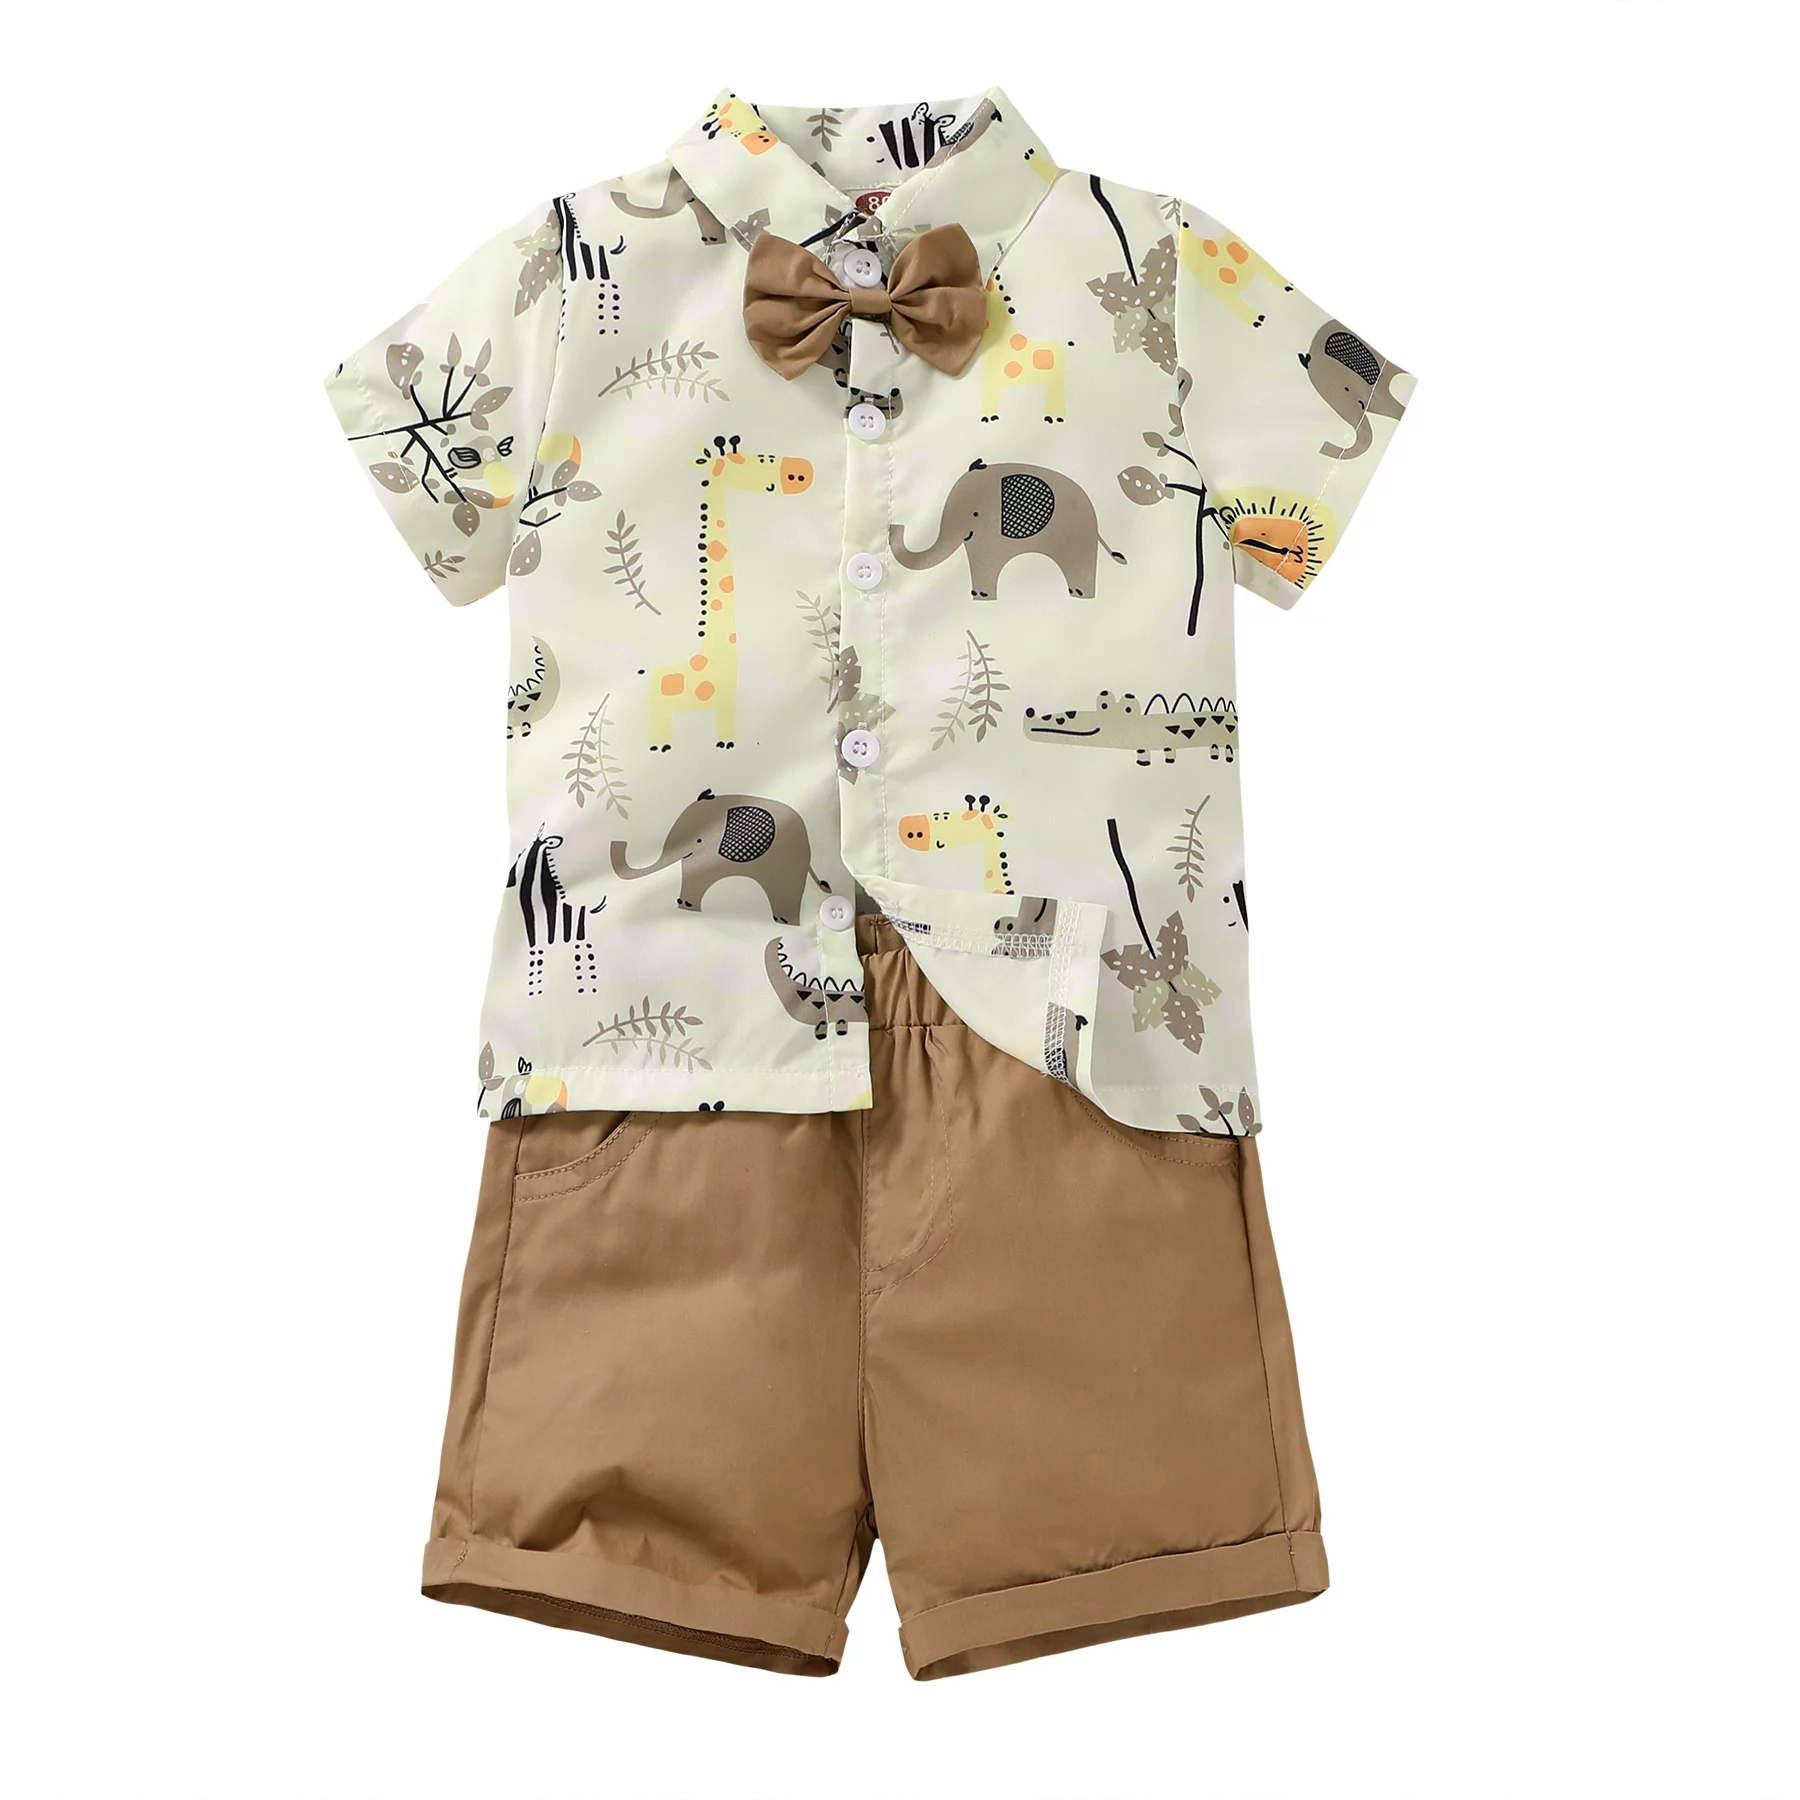 Younger Tree Toddler Baby Boy Casual Outfits Set Summer Short Sleeve Button Down Shirt Shorts Clothes 2Pcs for 18-24 Months